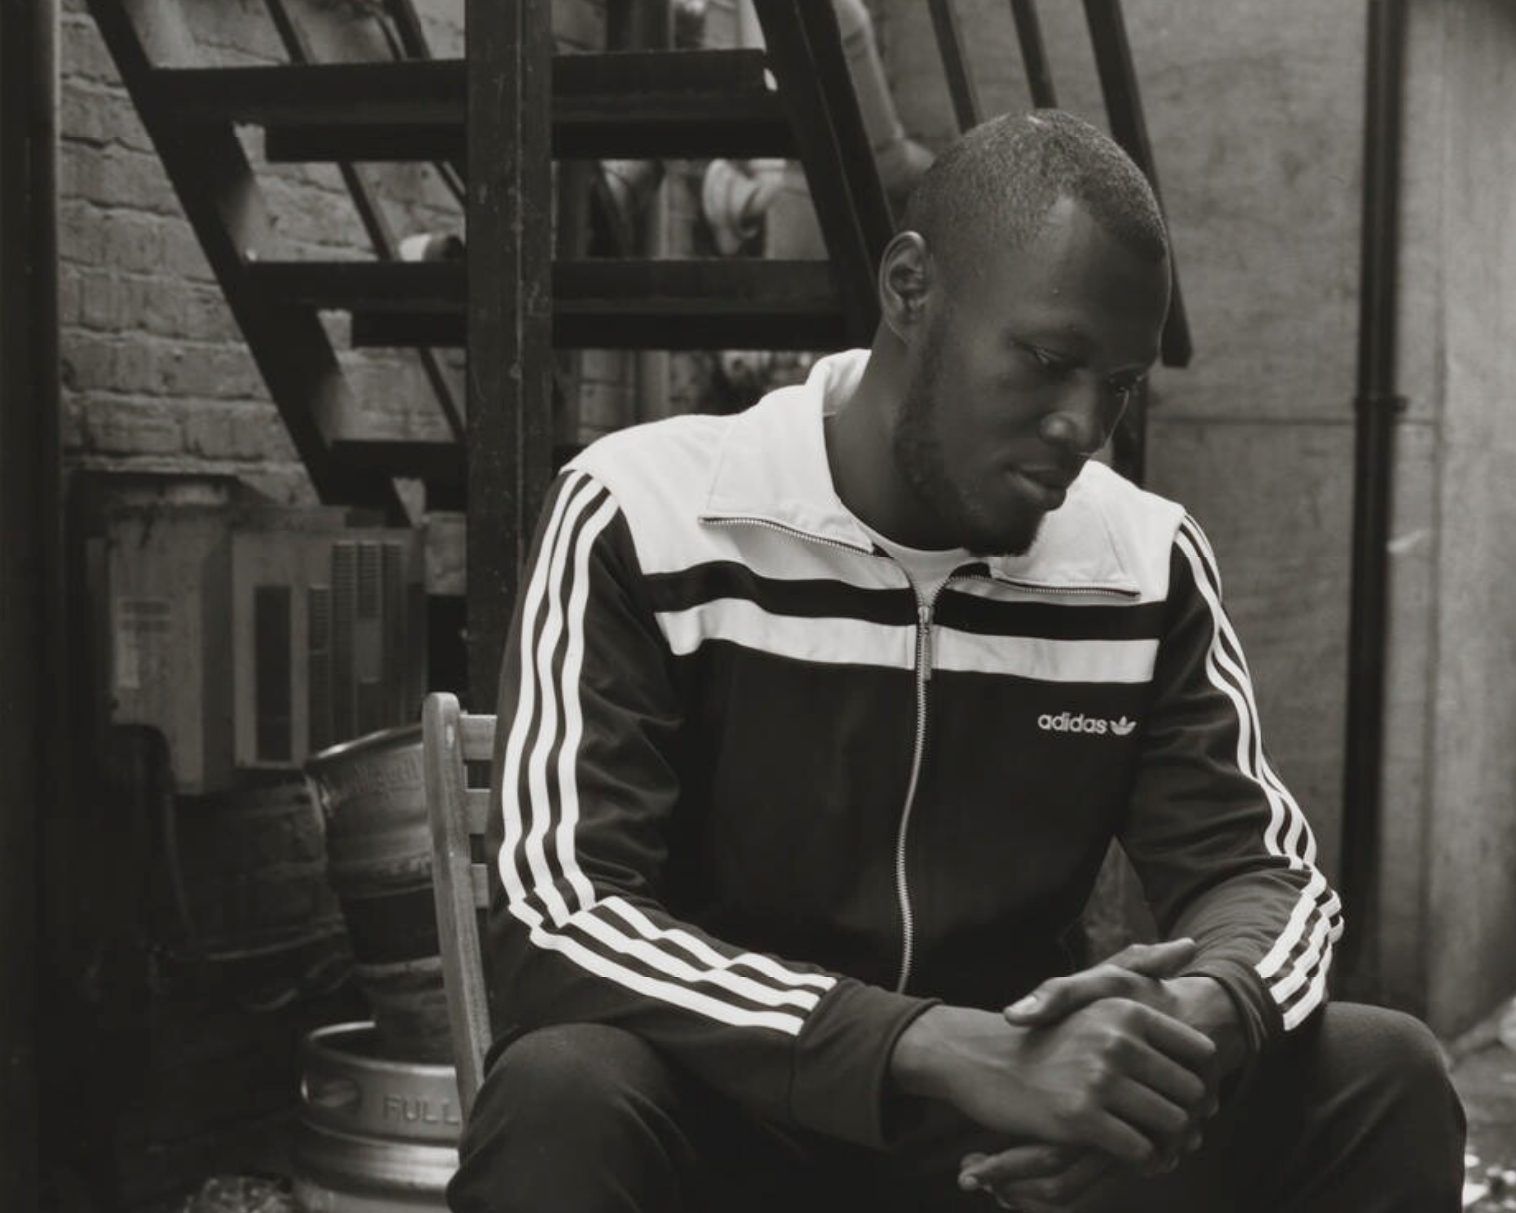 An image of a photograph by Olivia Rose of Stormzy.